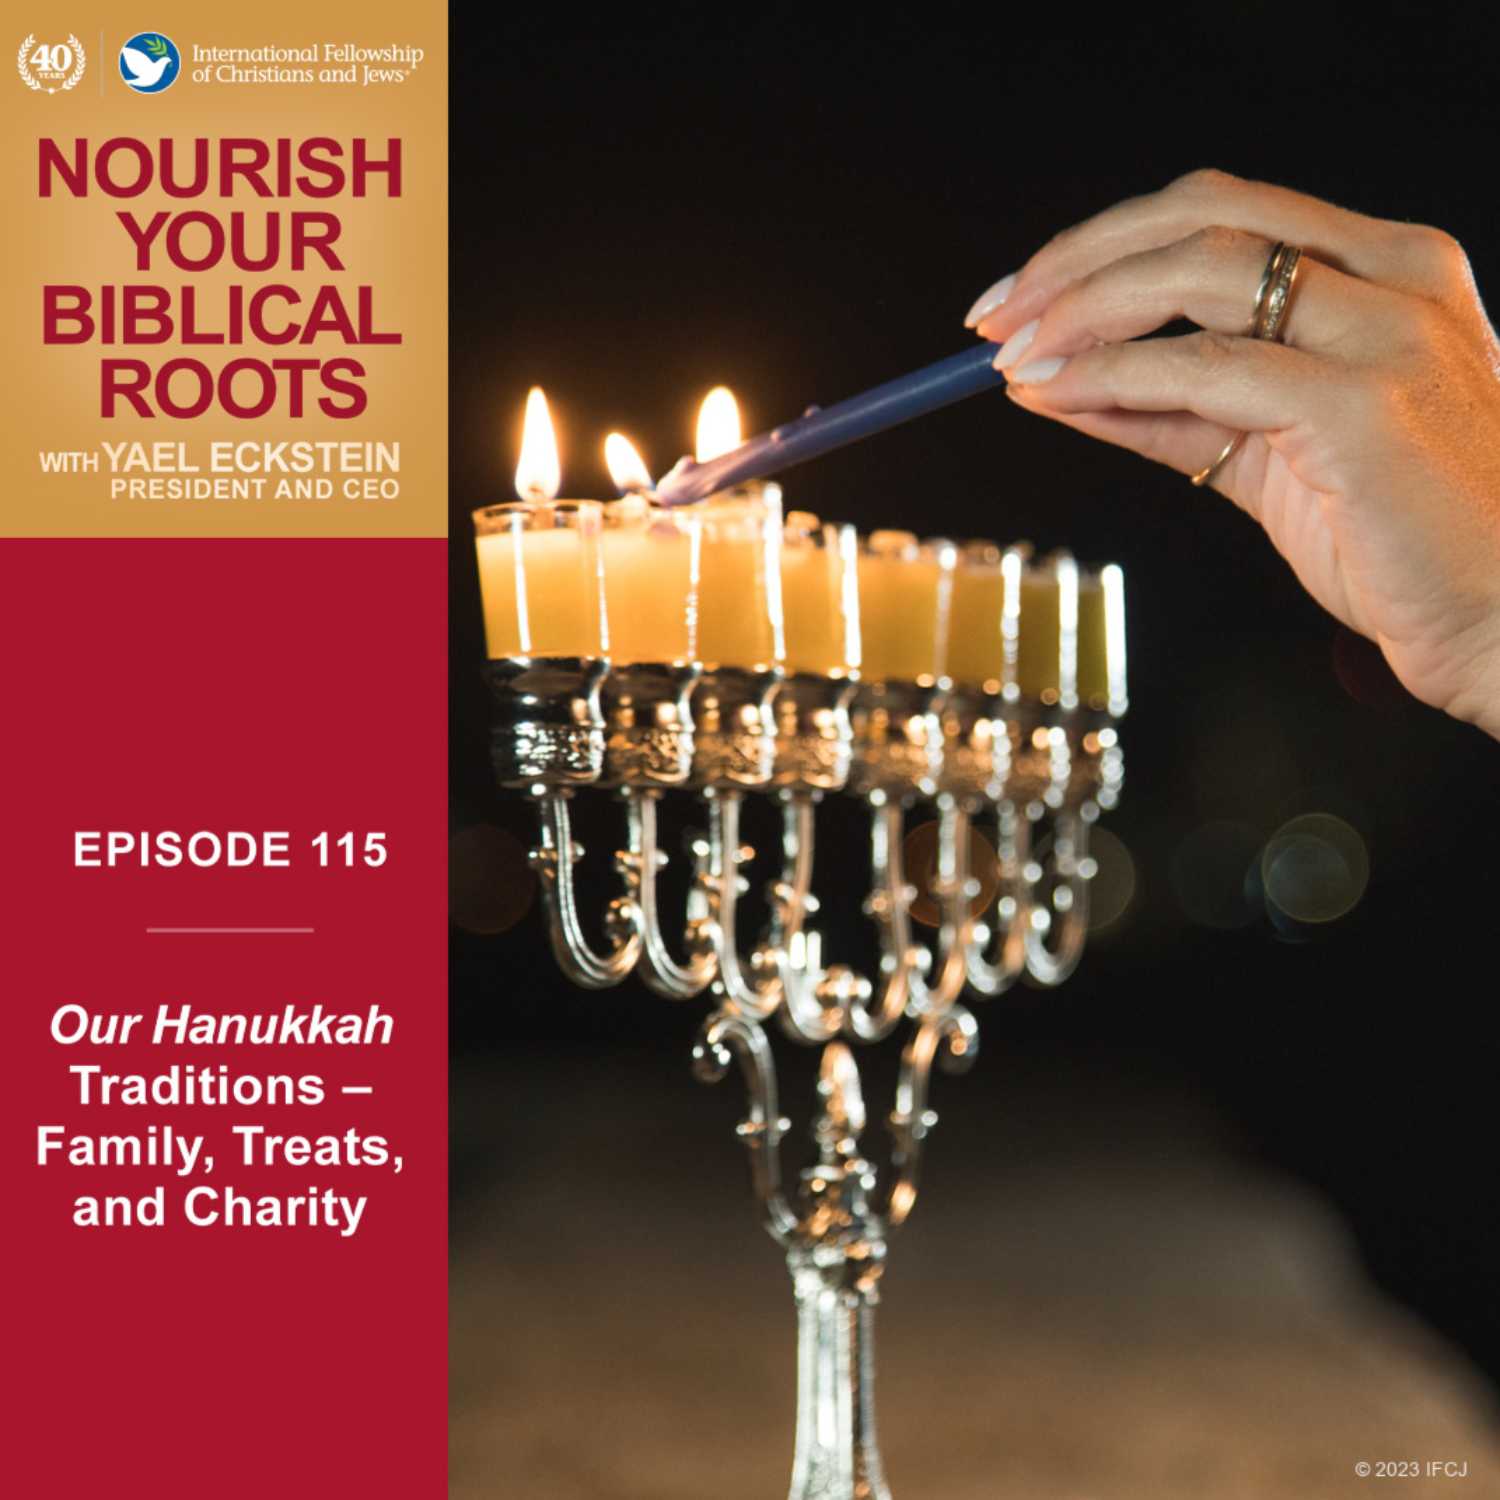 Our Hanukkah Traditions: Family, Treats, and Charity